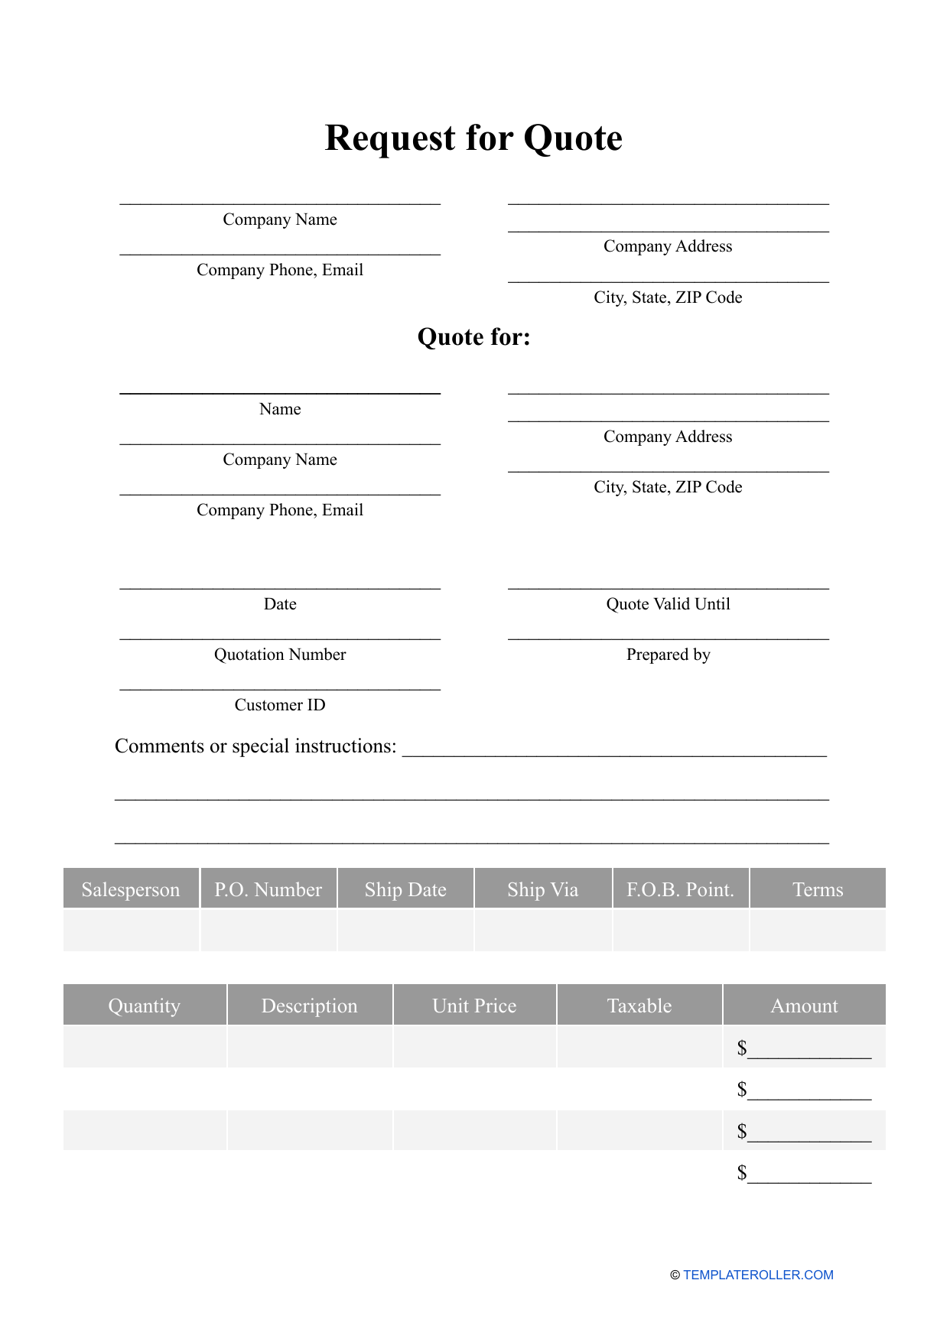 Request for Quote Template, Page 1